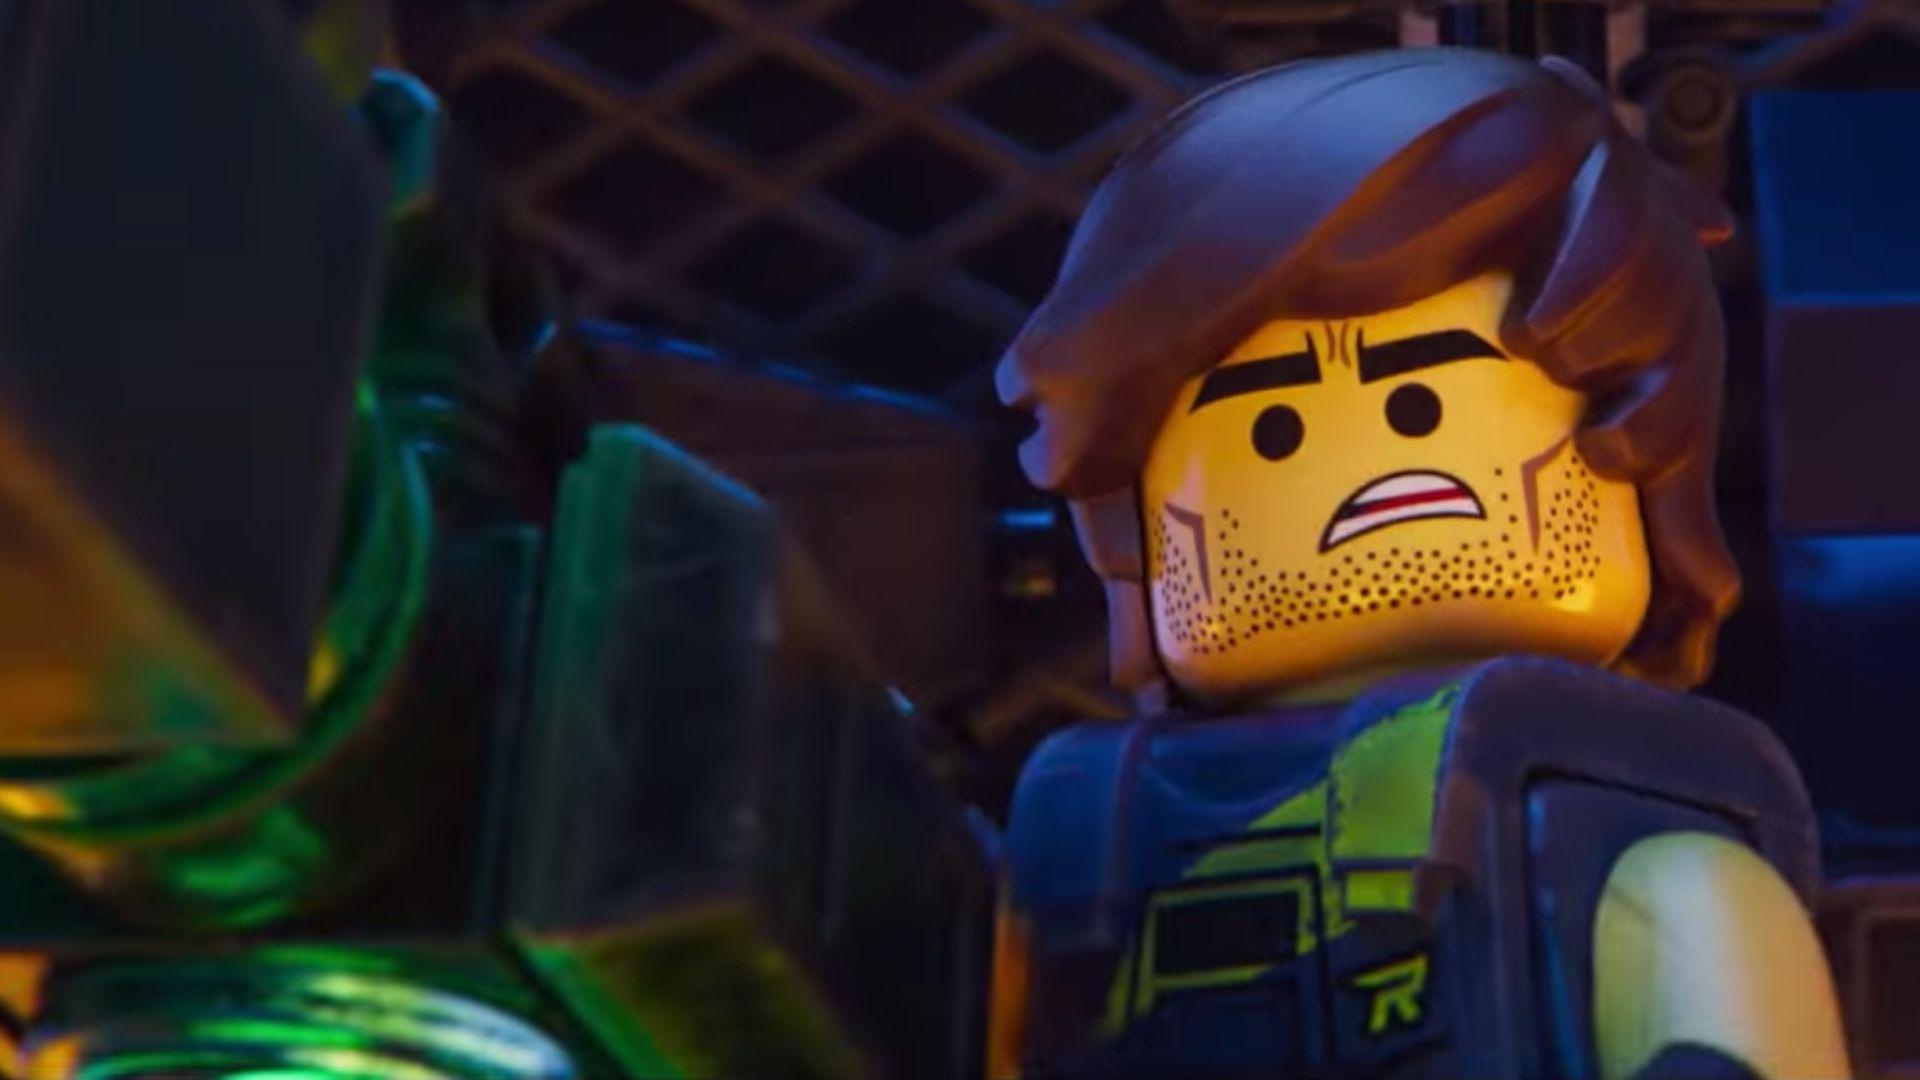 The New For THE LEGO MOVIE 2: THE SECOND PART Takes Us on an